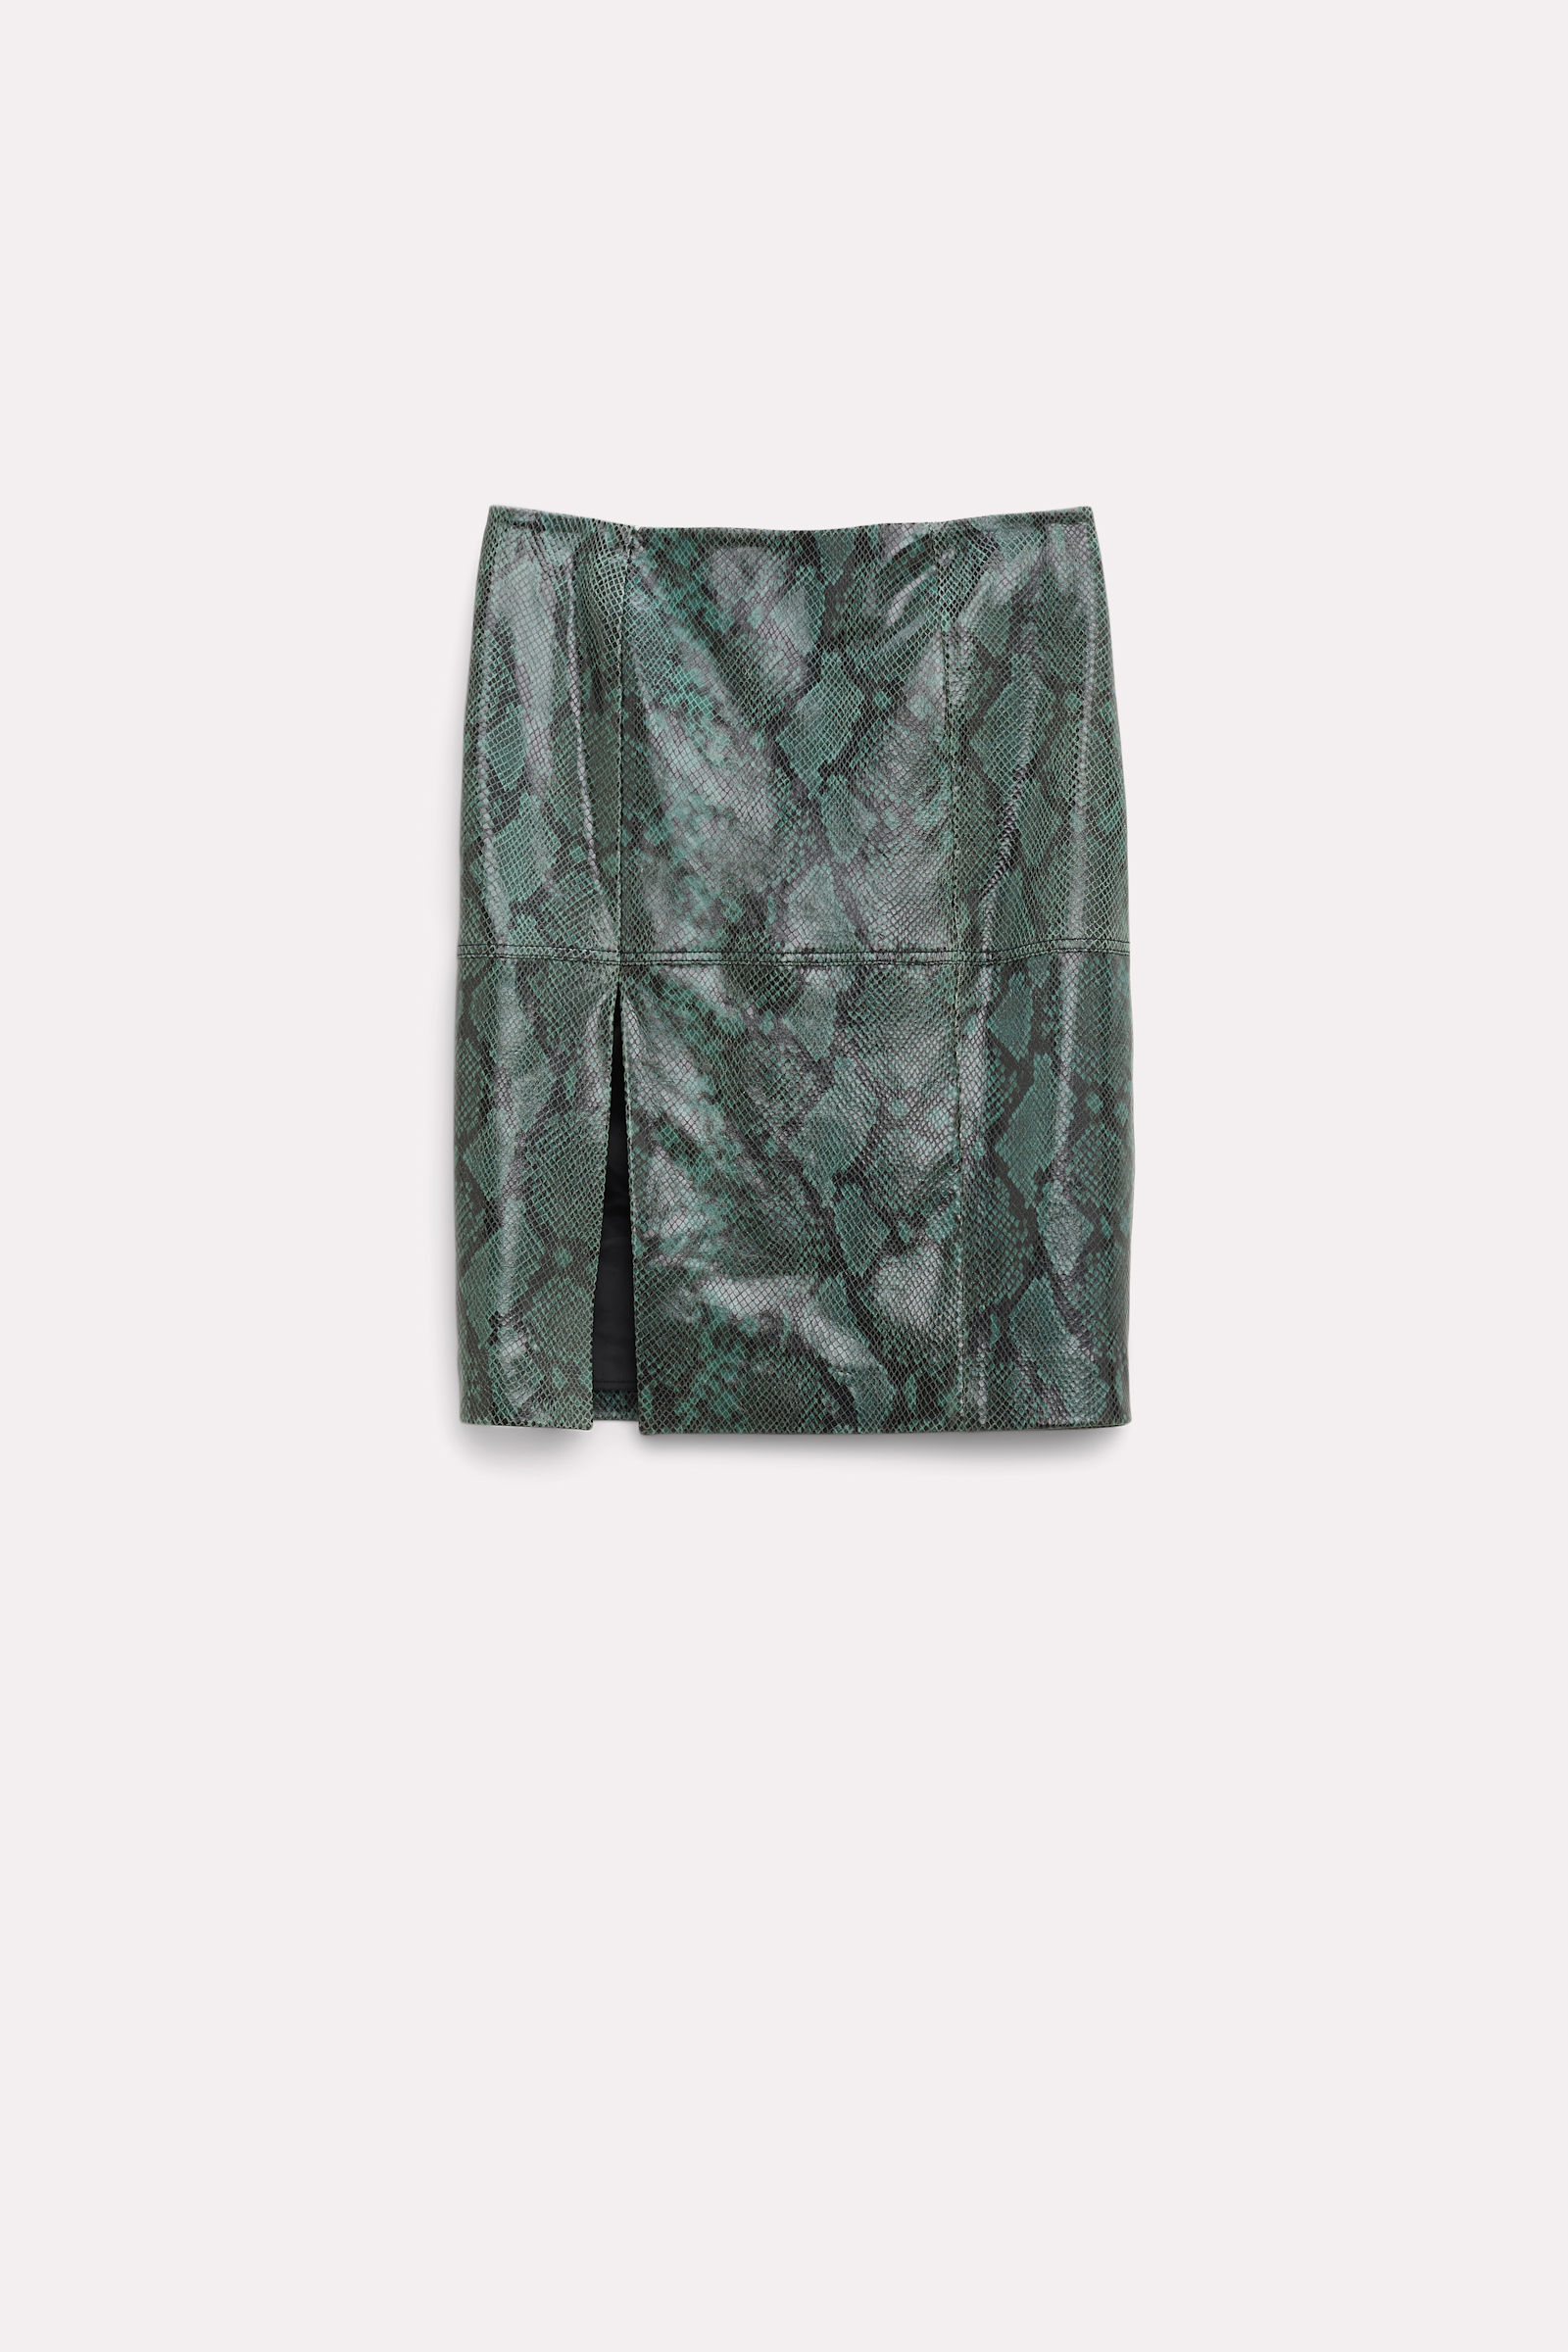 Dorothee Schumacher Leather skirt in python print leather green snake mix